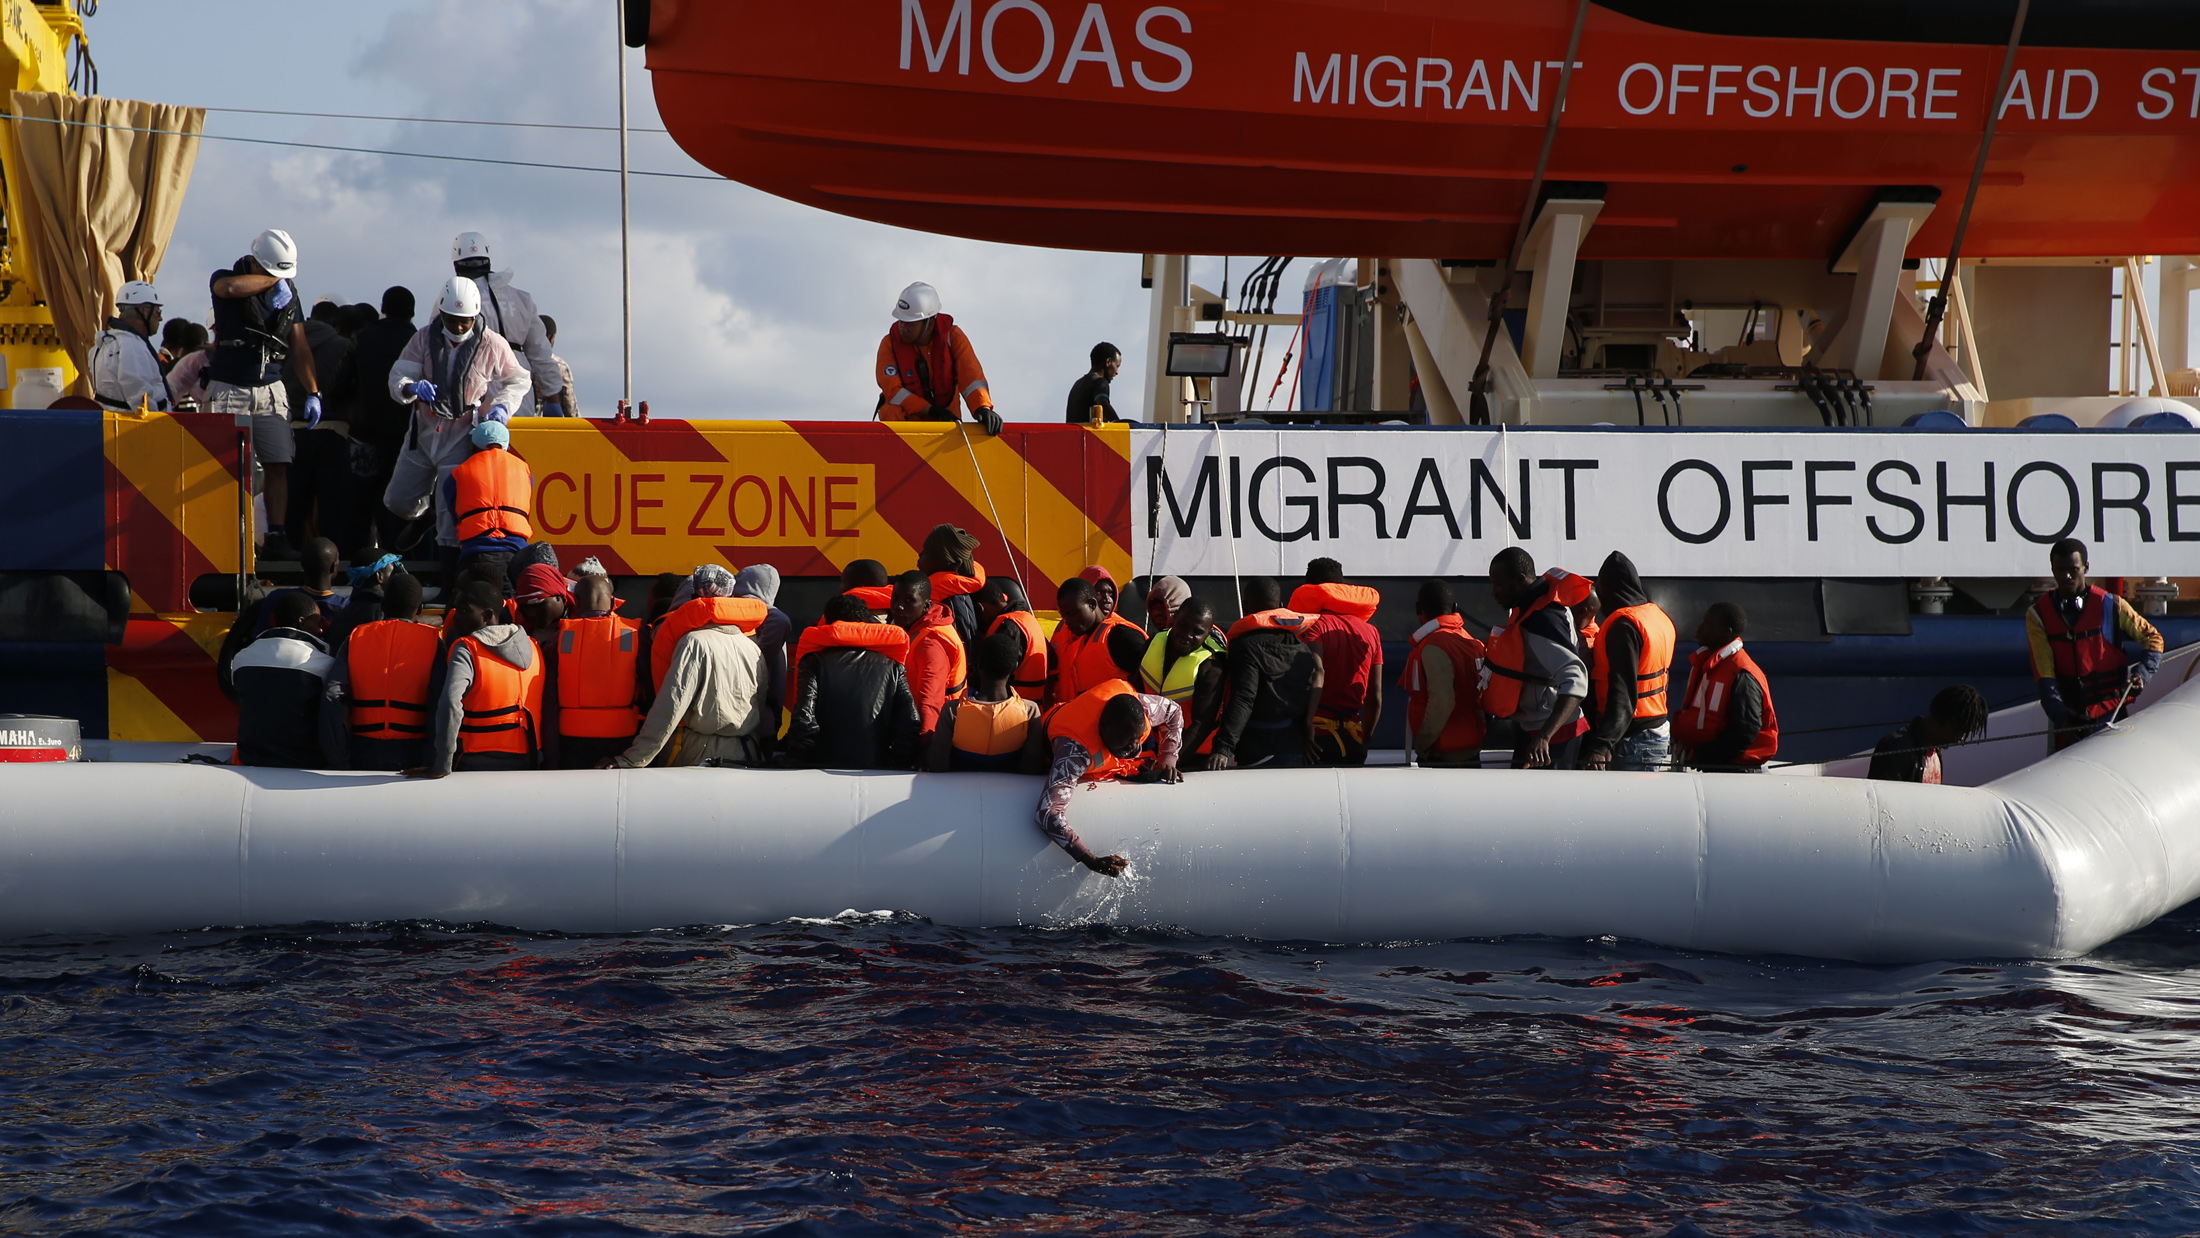 Migrants in a dinghy climb aboard the Migrant Offshore Aid Station (MOAS) ship Topaz Responder, some 20 nautical miles off the coast of Libya, June 23, 2016. (Darrin Zammit Lupi—Reuters)